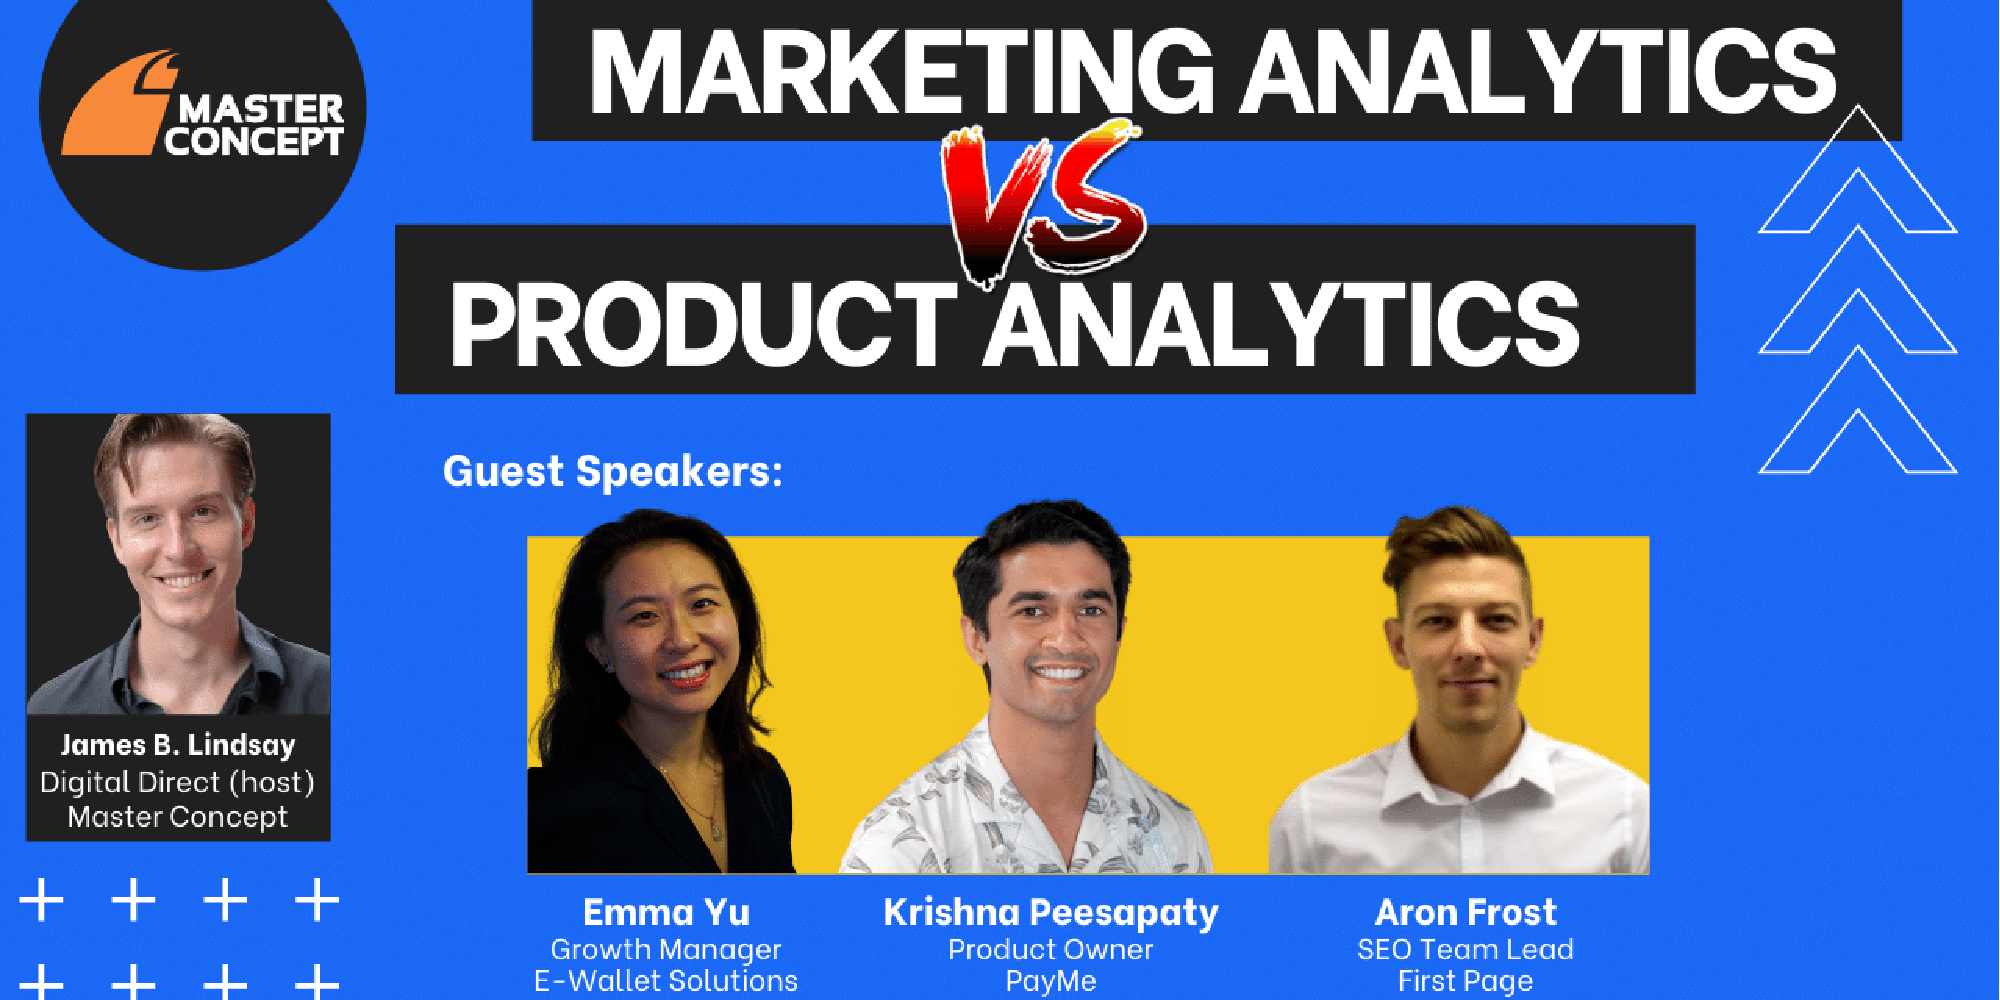 Marketing Analytics vs Product Analytics - What's the difference?